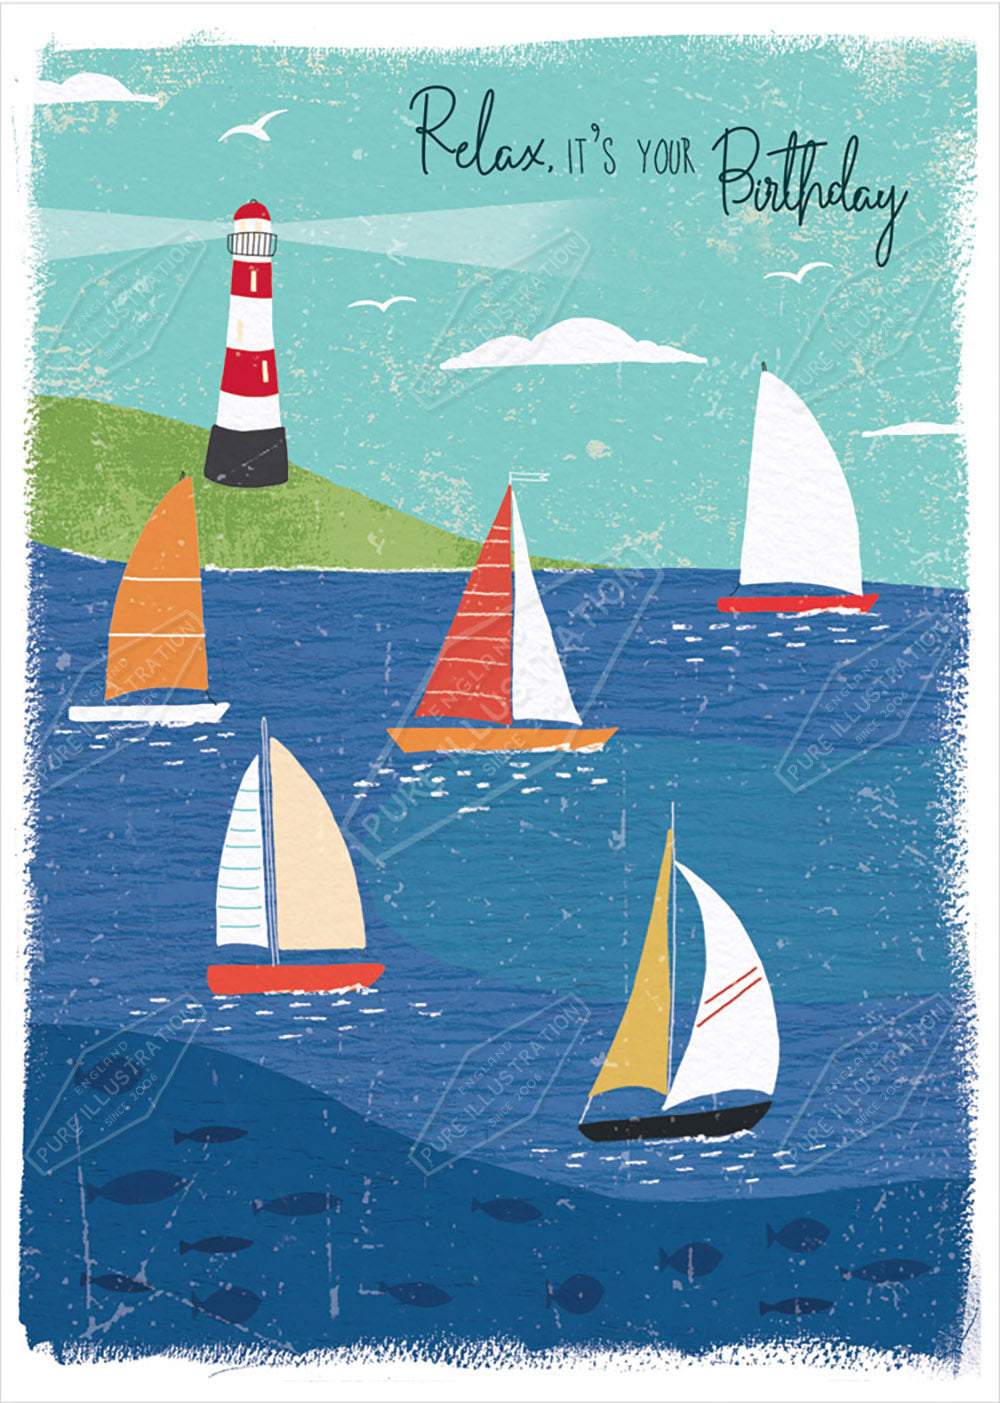 Sailing Birthday Illustration by Cory Reid - Pure Art Licensing Agency & Surface Design Studio